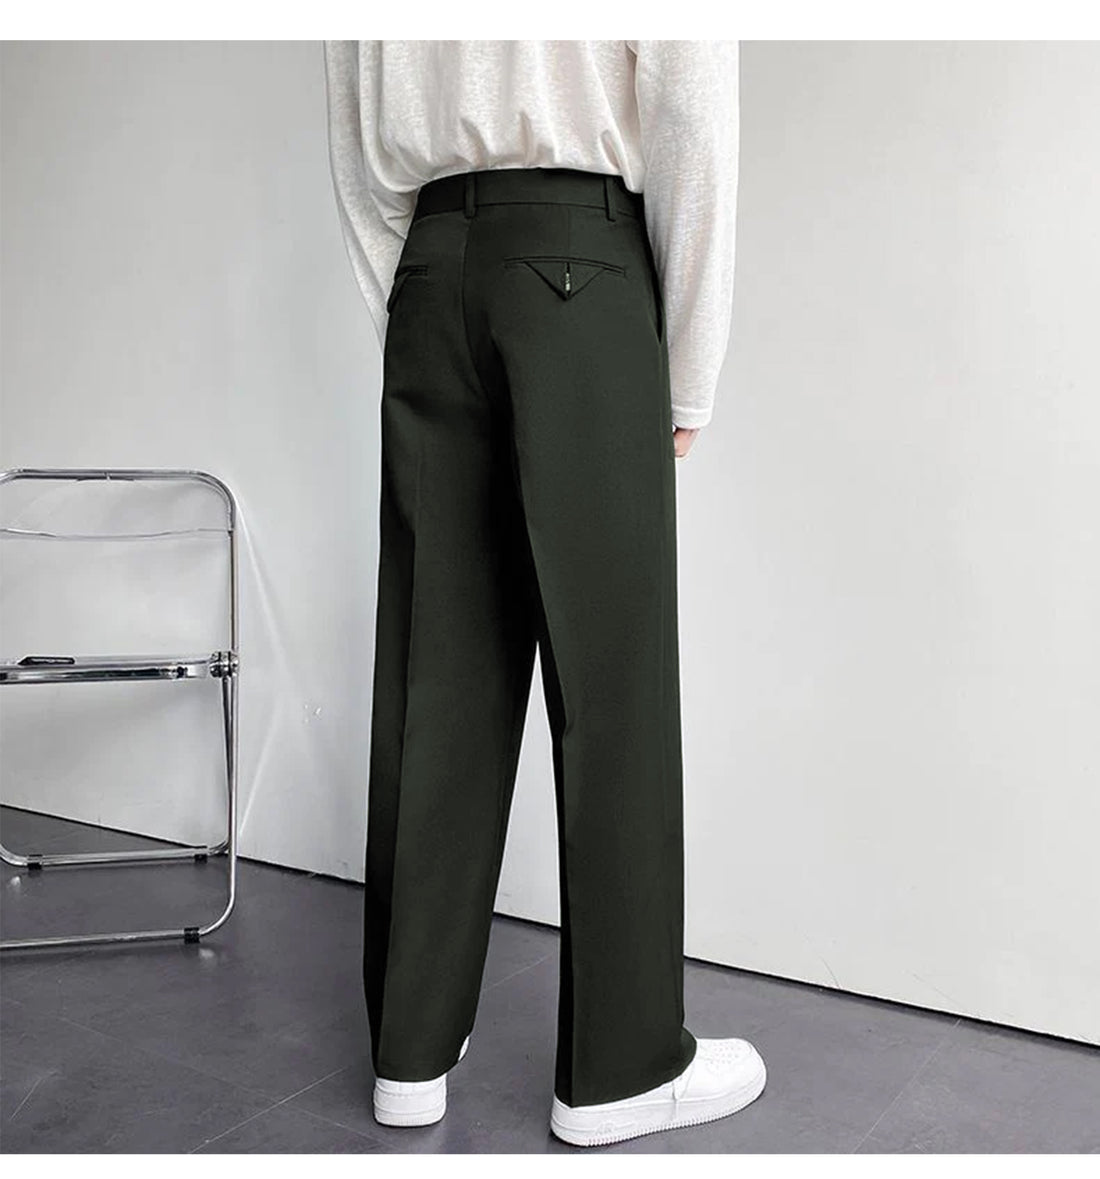 Uncompromising Comfort: Bwolves Korean Baggy Loose Fit Pants in Graphite Gray